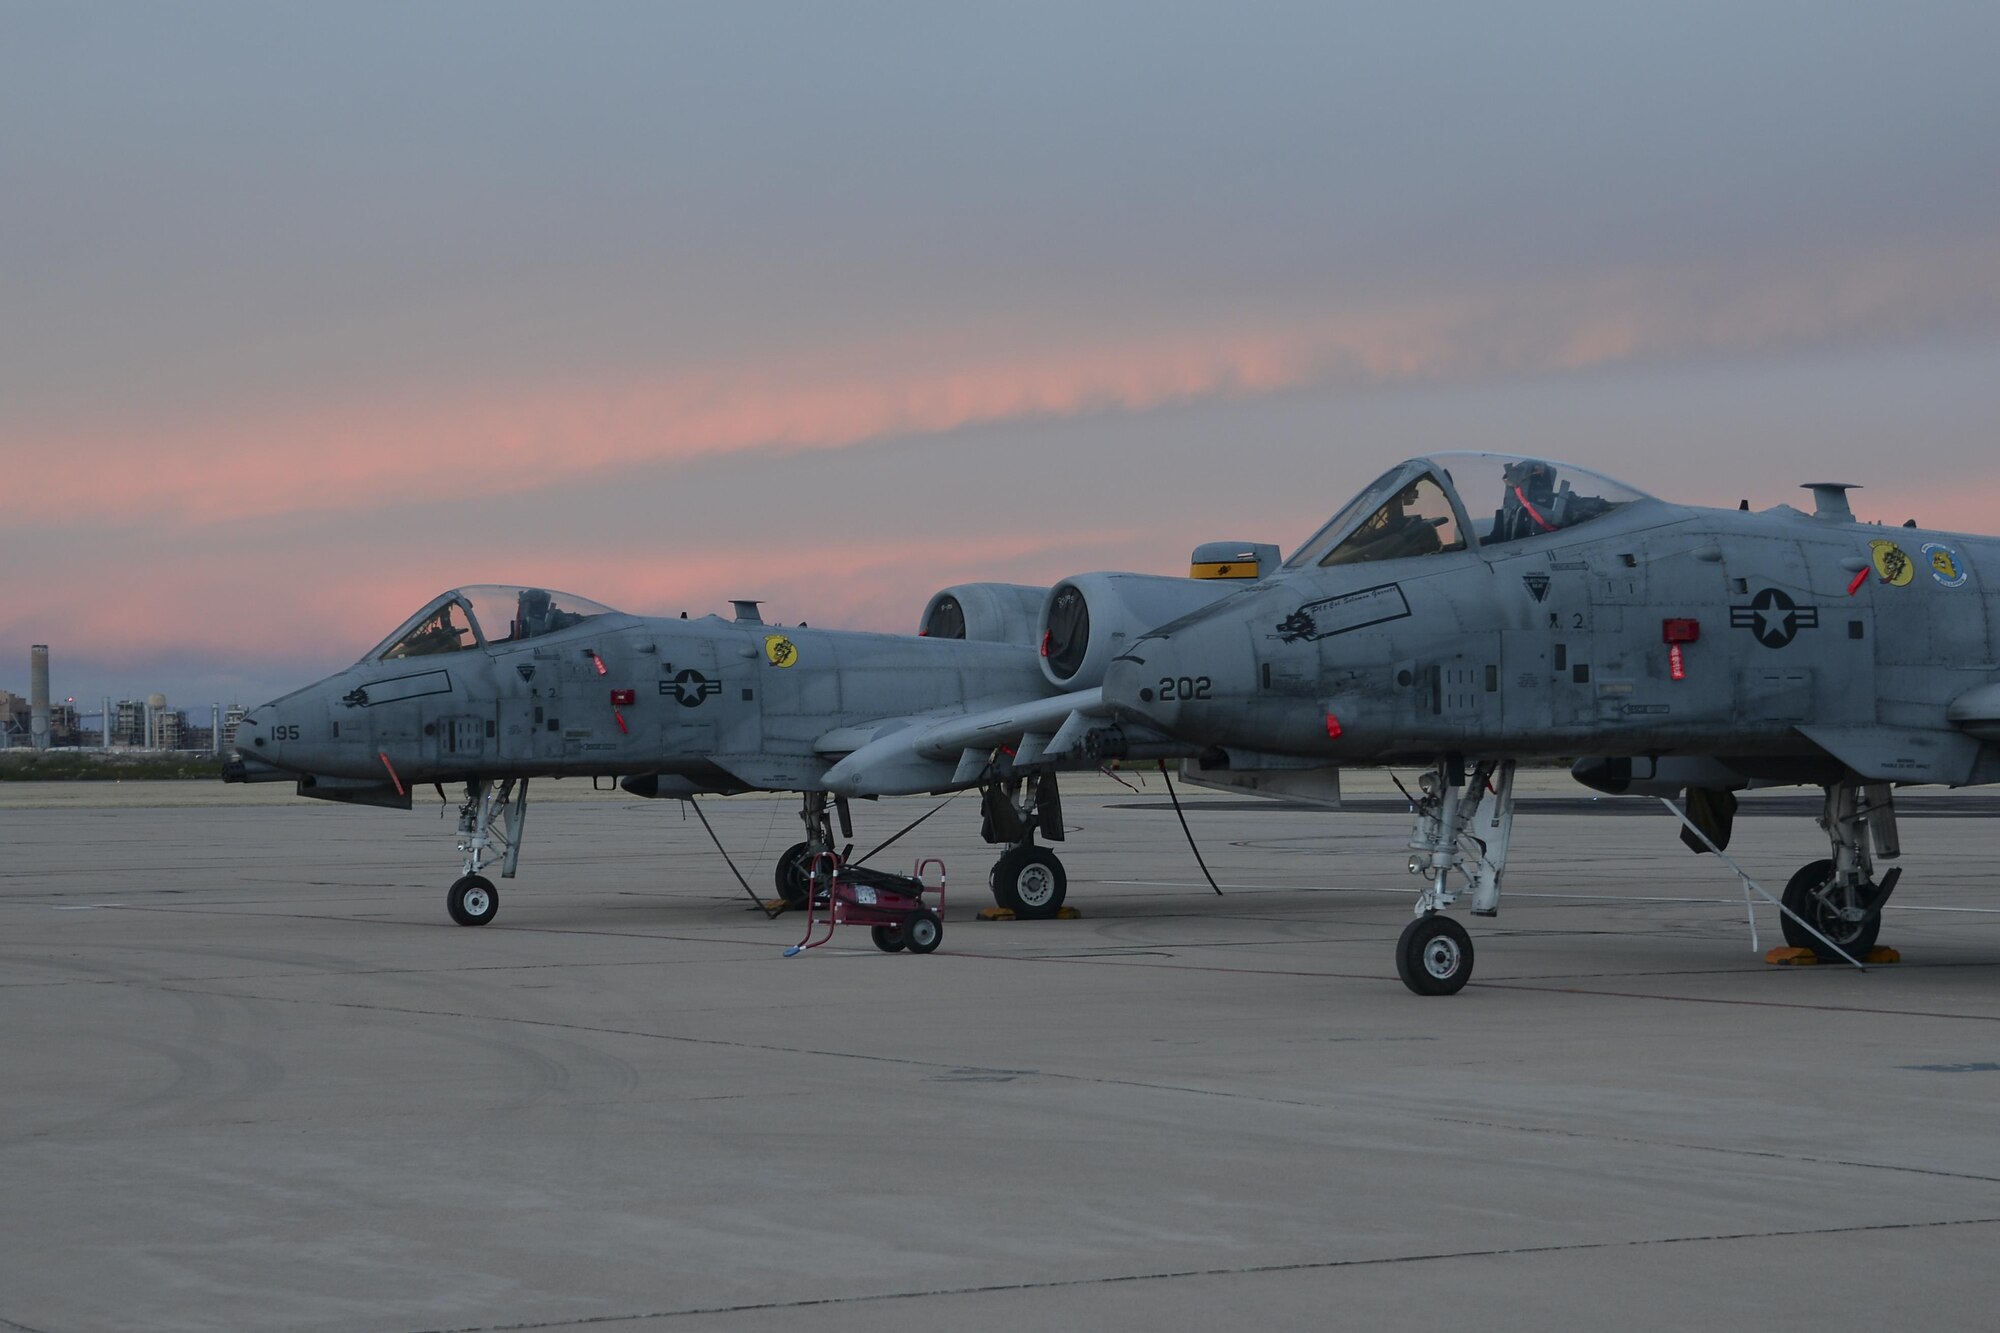 Two U.S. Air Force A-10C Thunderbolt IIs rest on the flightline during the 2017 Heritage Flight Training and Certification Course at Davis-Monthan Air Force Base, Ariz., Feb. 12, 2017. The HFTCC provides civilian and military pilots the opportunity to practice flying in formation together in preparation for future air shows. (U.S. Air Force photo by Senior Airman Ashley N. Steffen)